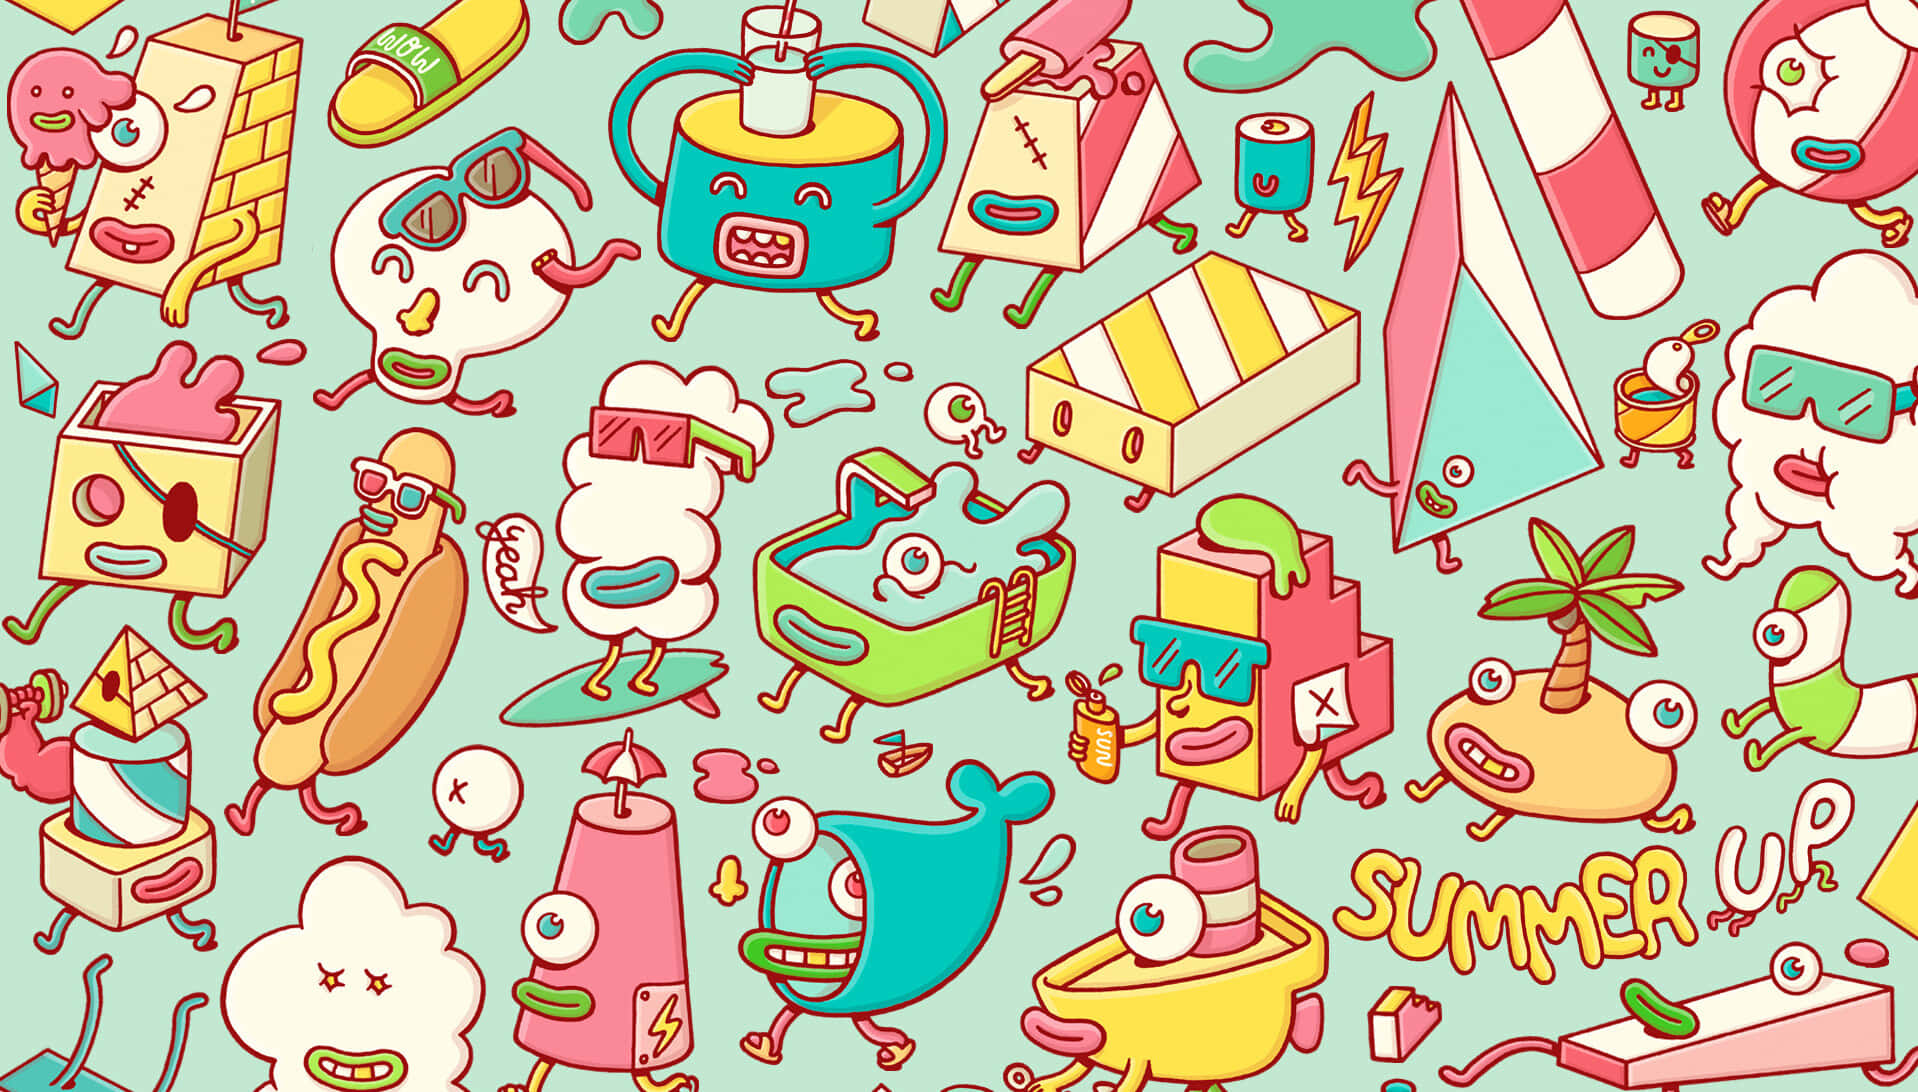 Download A Colorful Pattern Of Cartoon Characters | Wallpapers.com